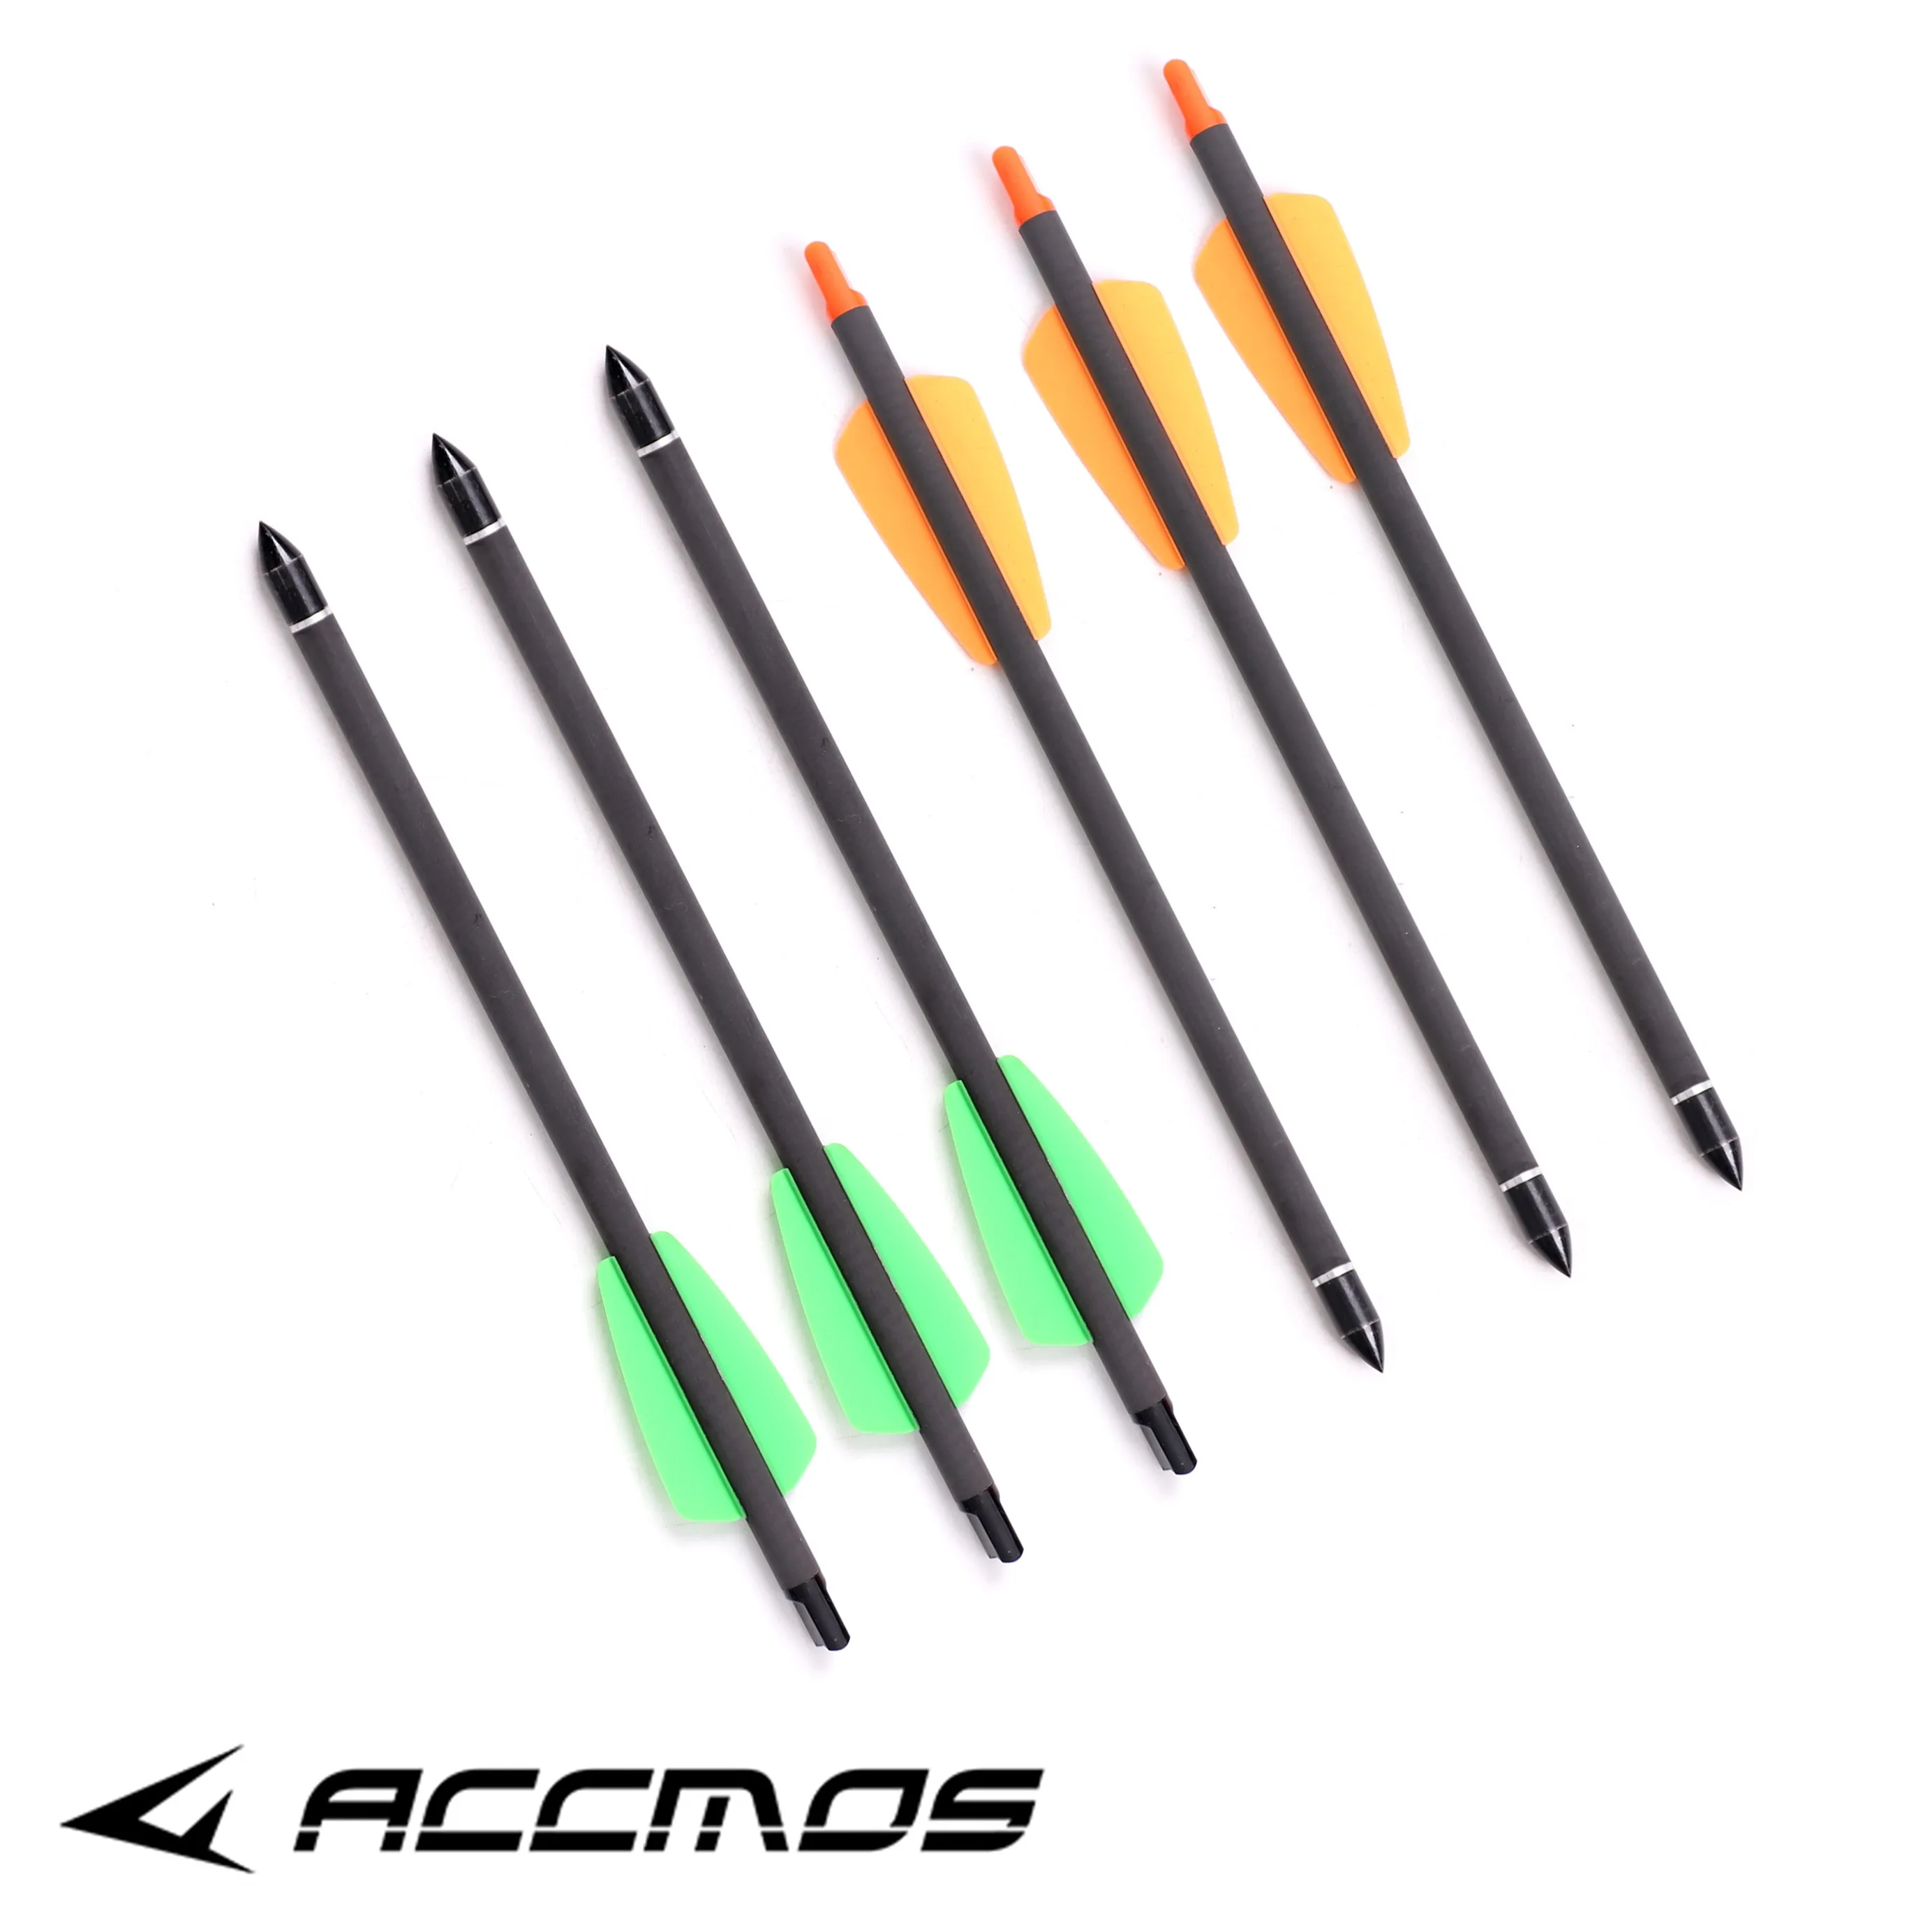 

6pc Archery ID 6.2 MM Spine 350 Pure Carbon Arrows Bolts For Crossbow Model- COBRA SYSTEM R9(not including crossbow)